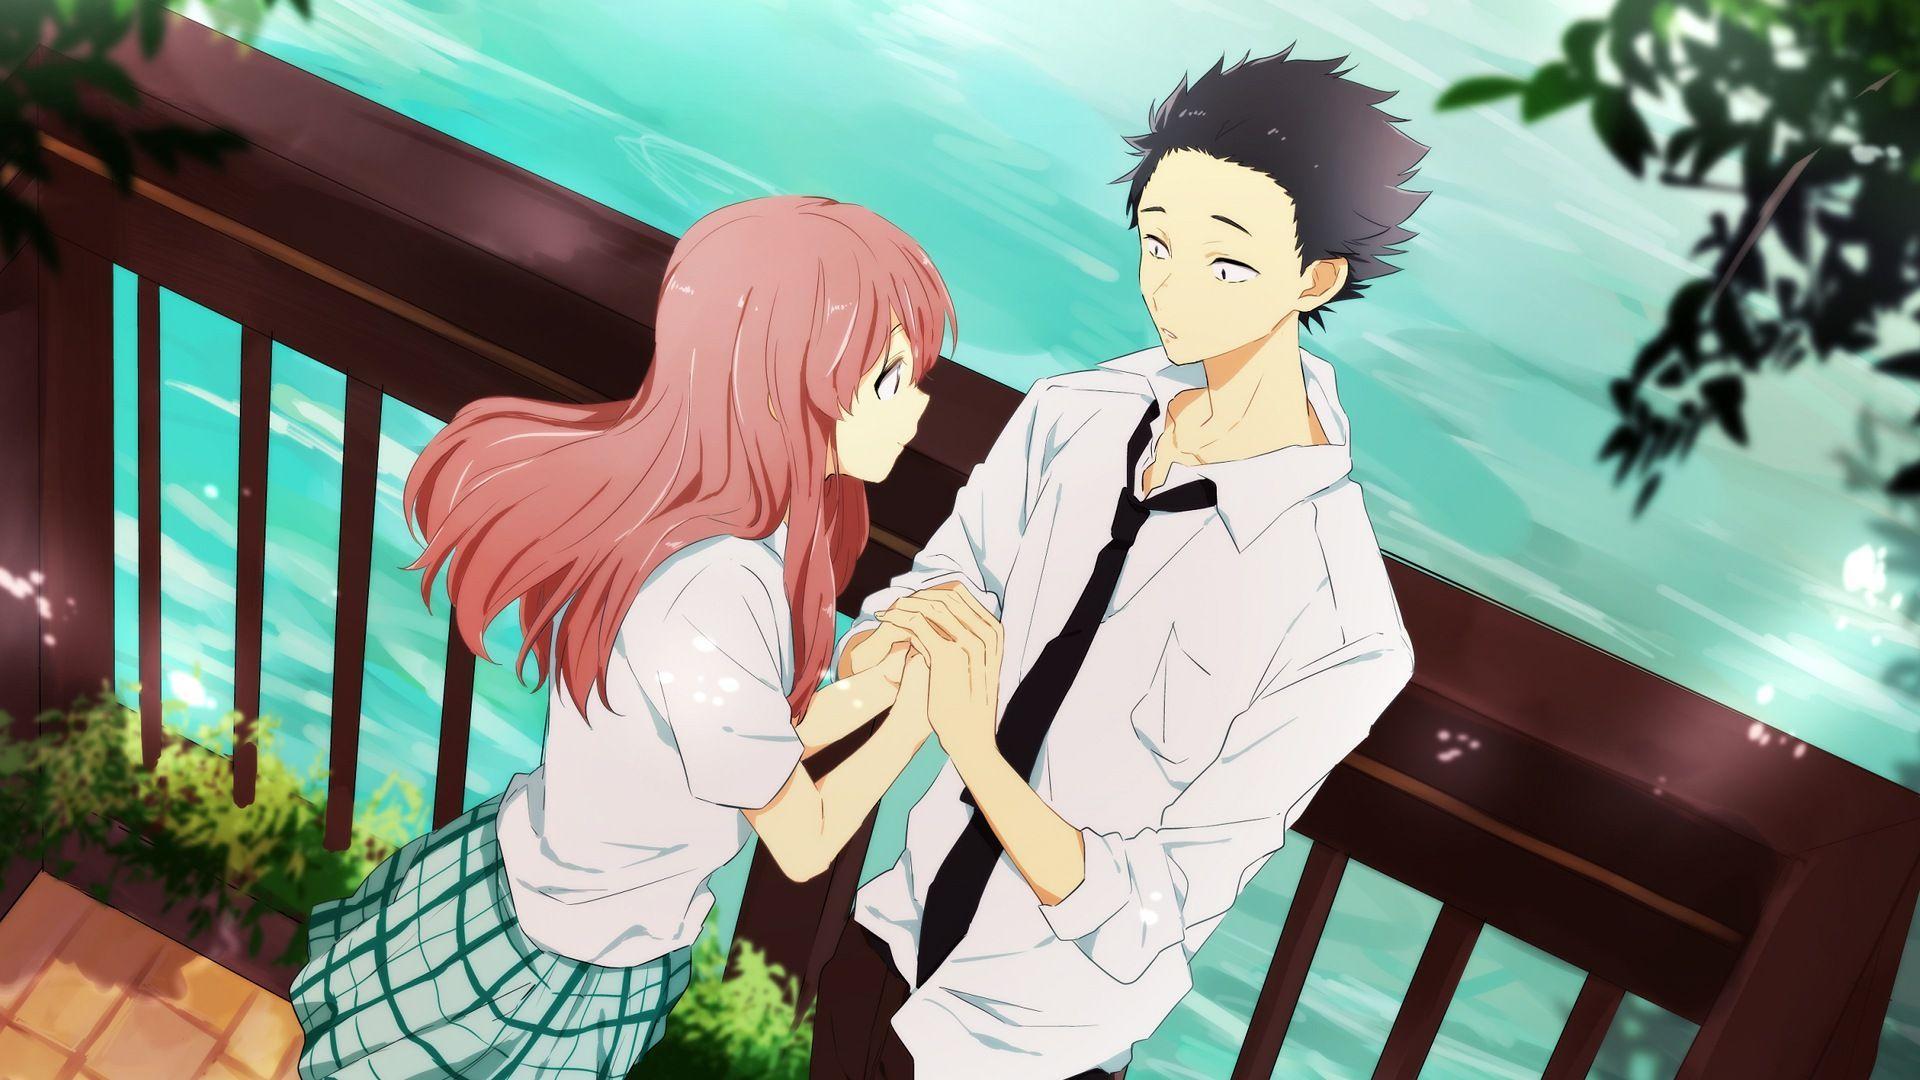 A Silent Voice Hd Wallpapers - Wallpaper Cave